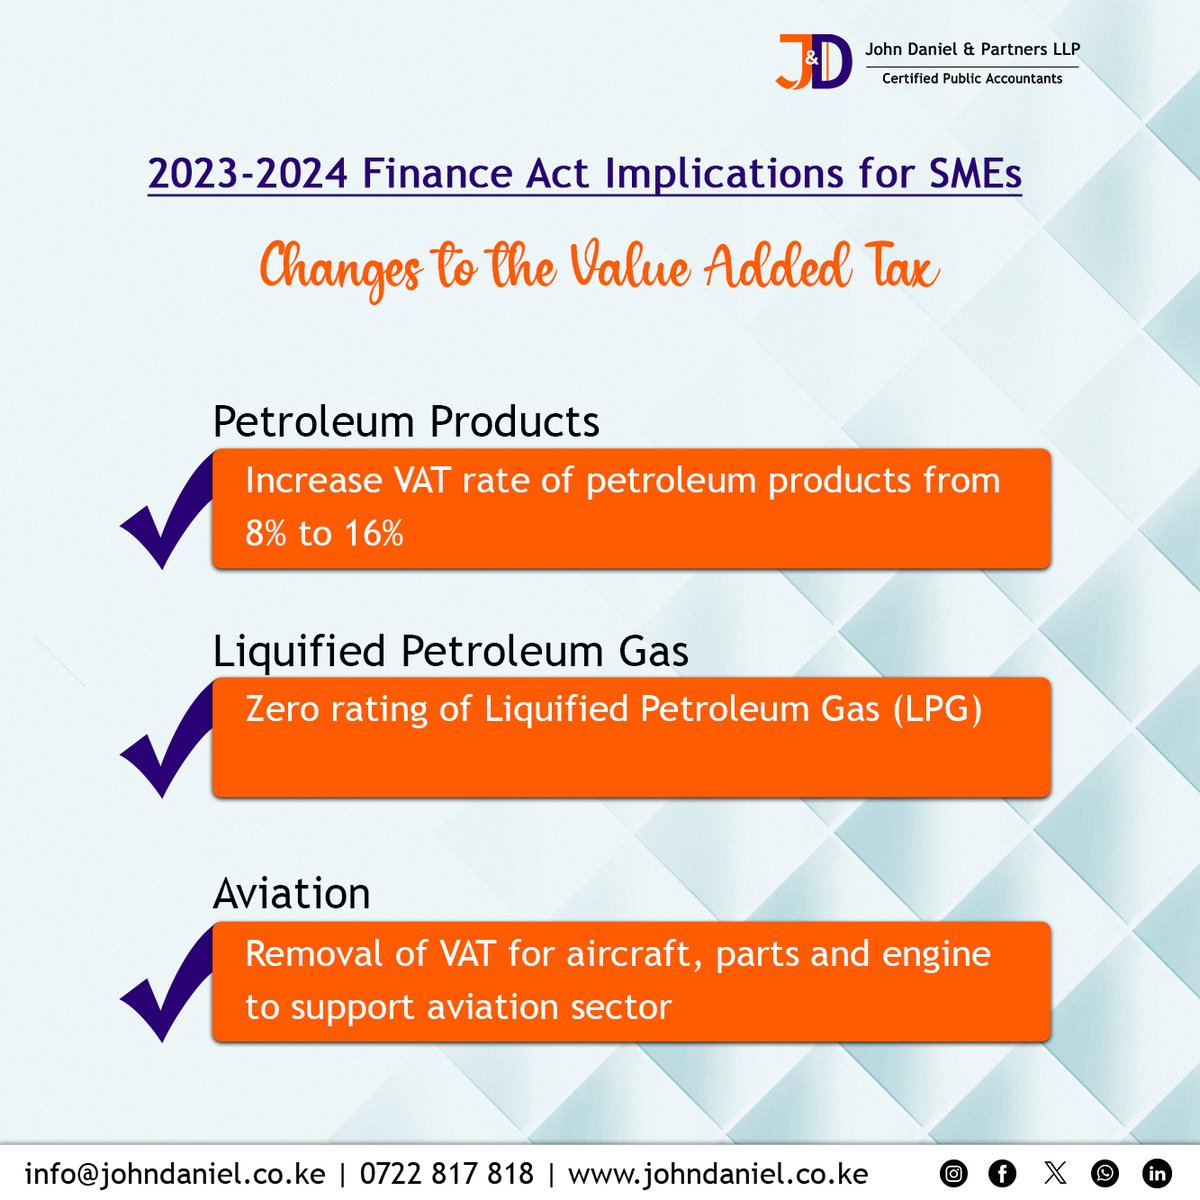 Good morning.
Here are some changes on VAT from the 2023-24 Finance Act. How does this affect your business?

#Finance #Financeact #business #businessaccounting #MondayMotivation #VAT #Taxes